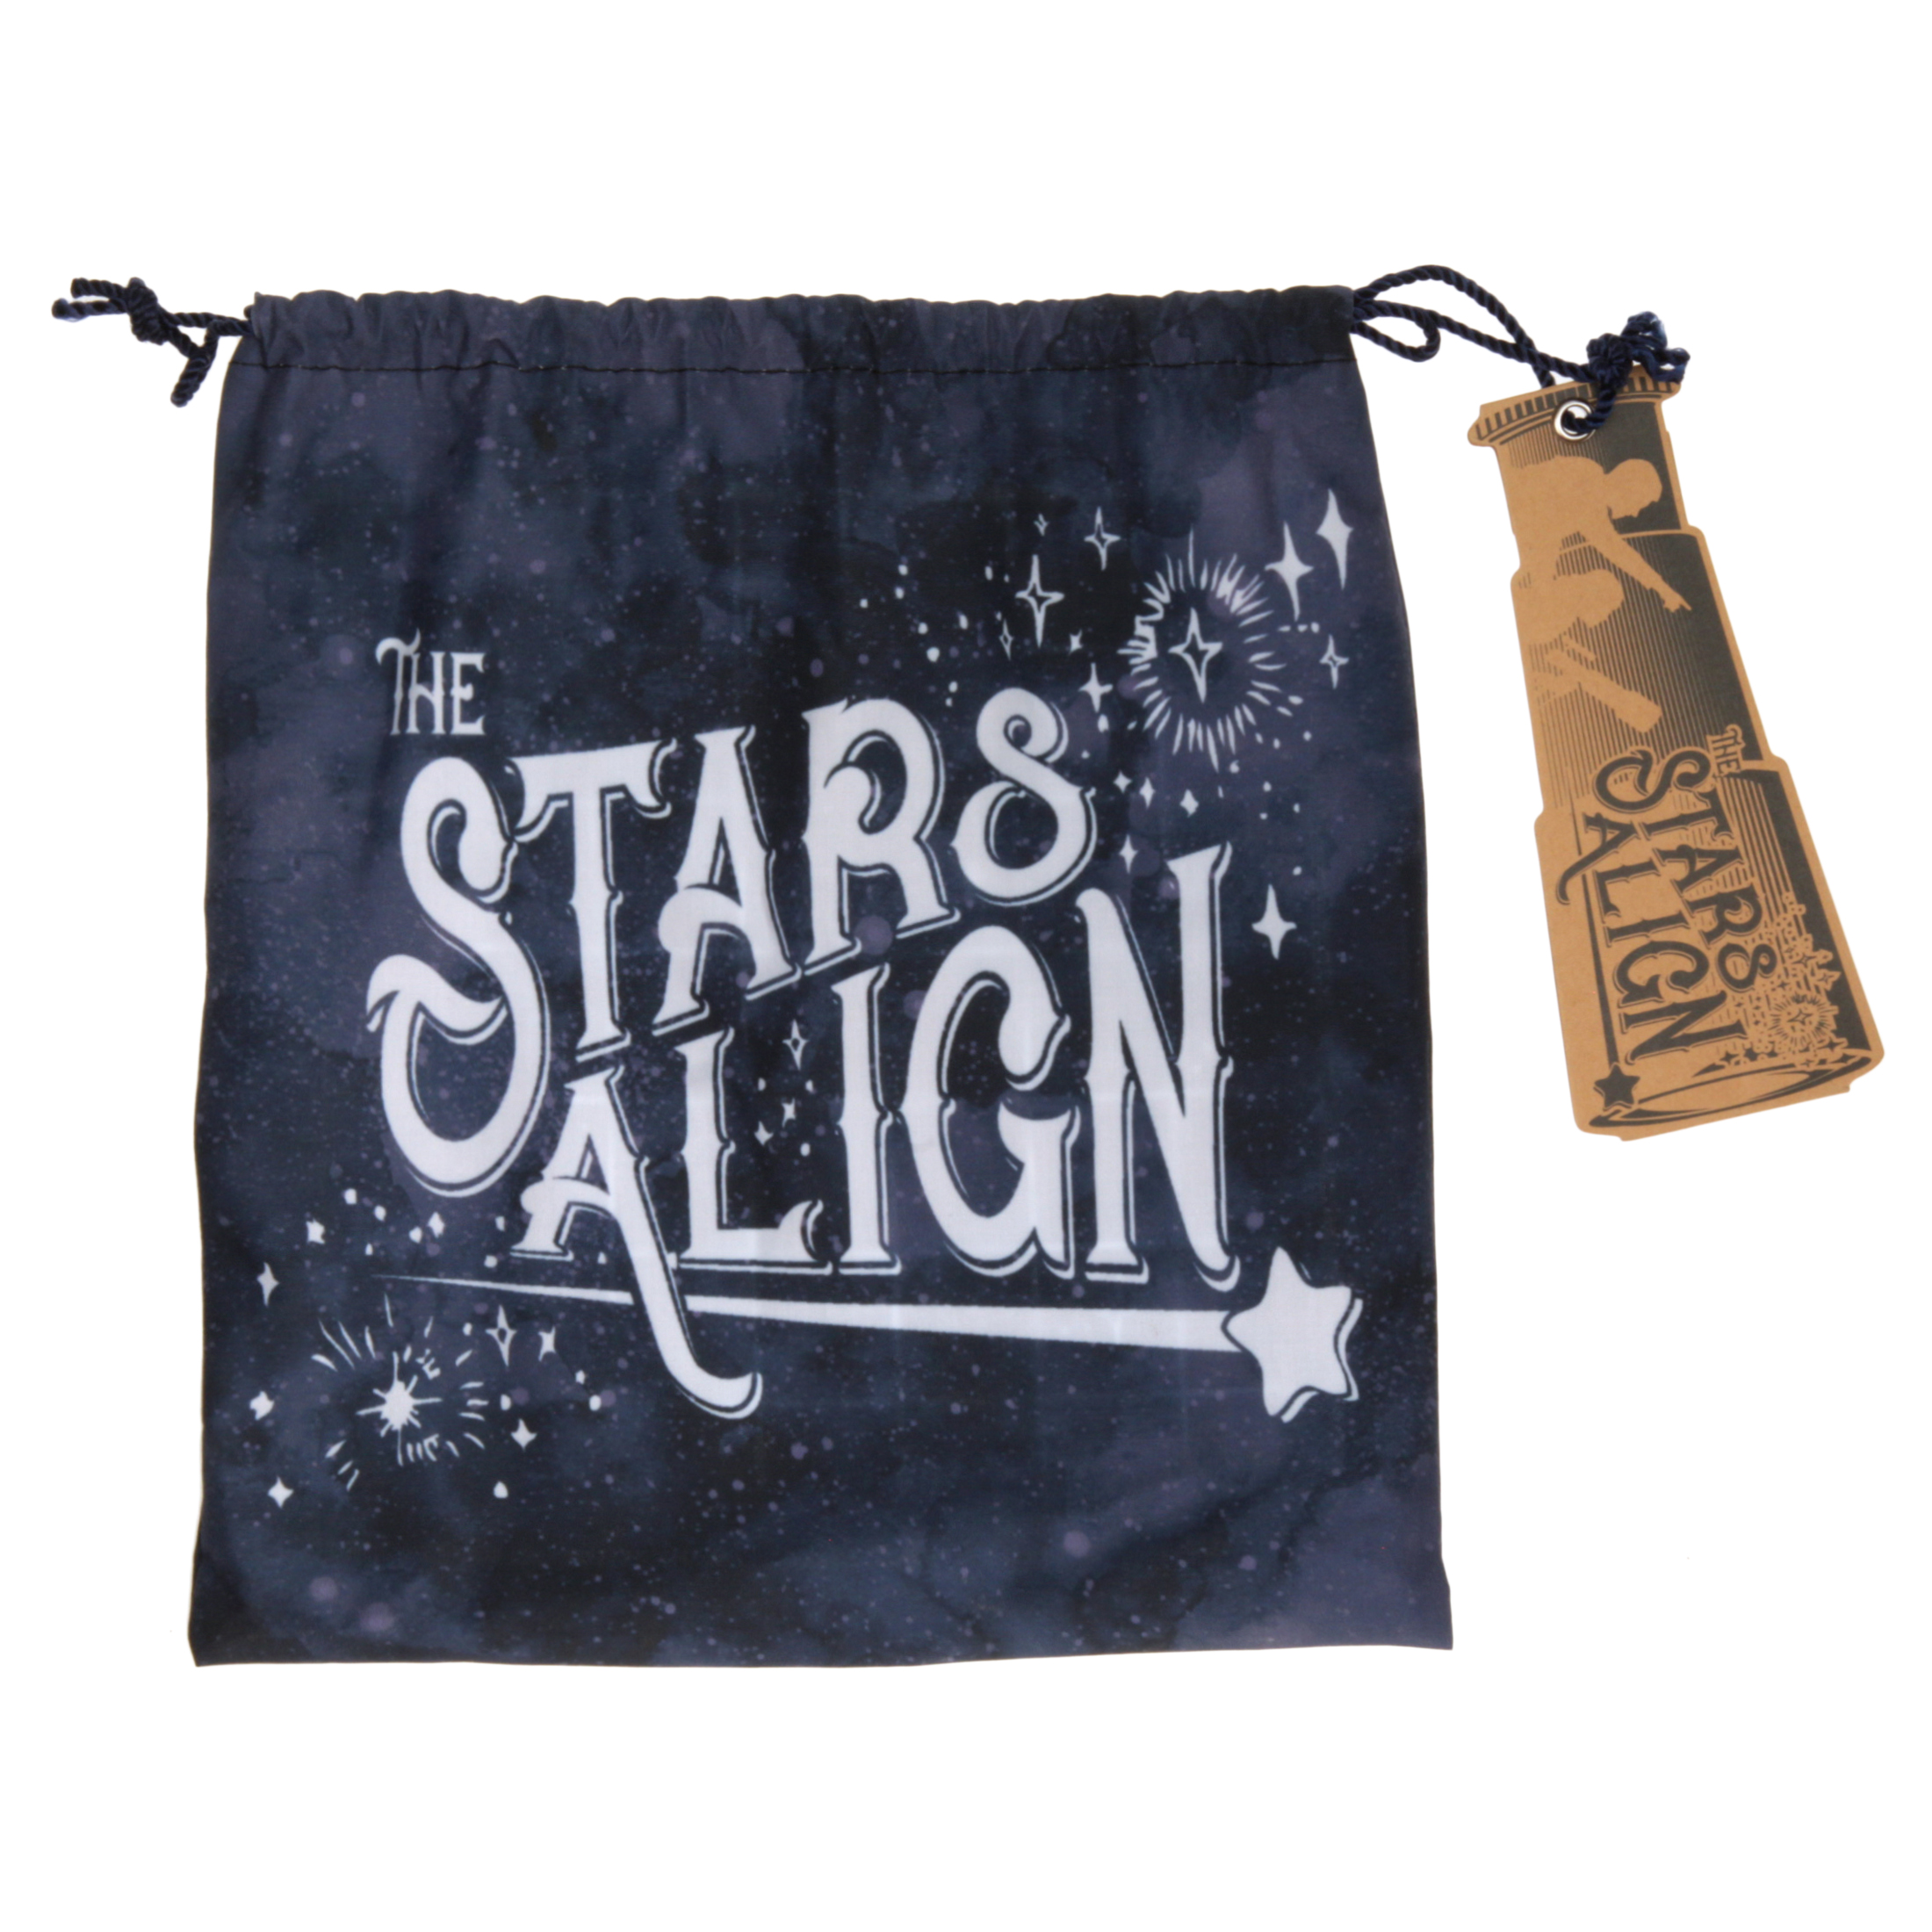 Stars align Board Game by ad Magic - image 1 of 5